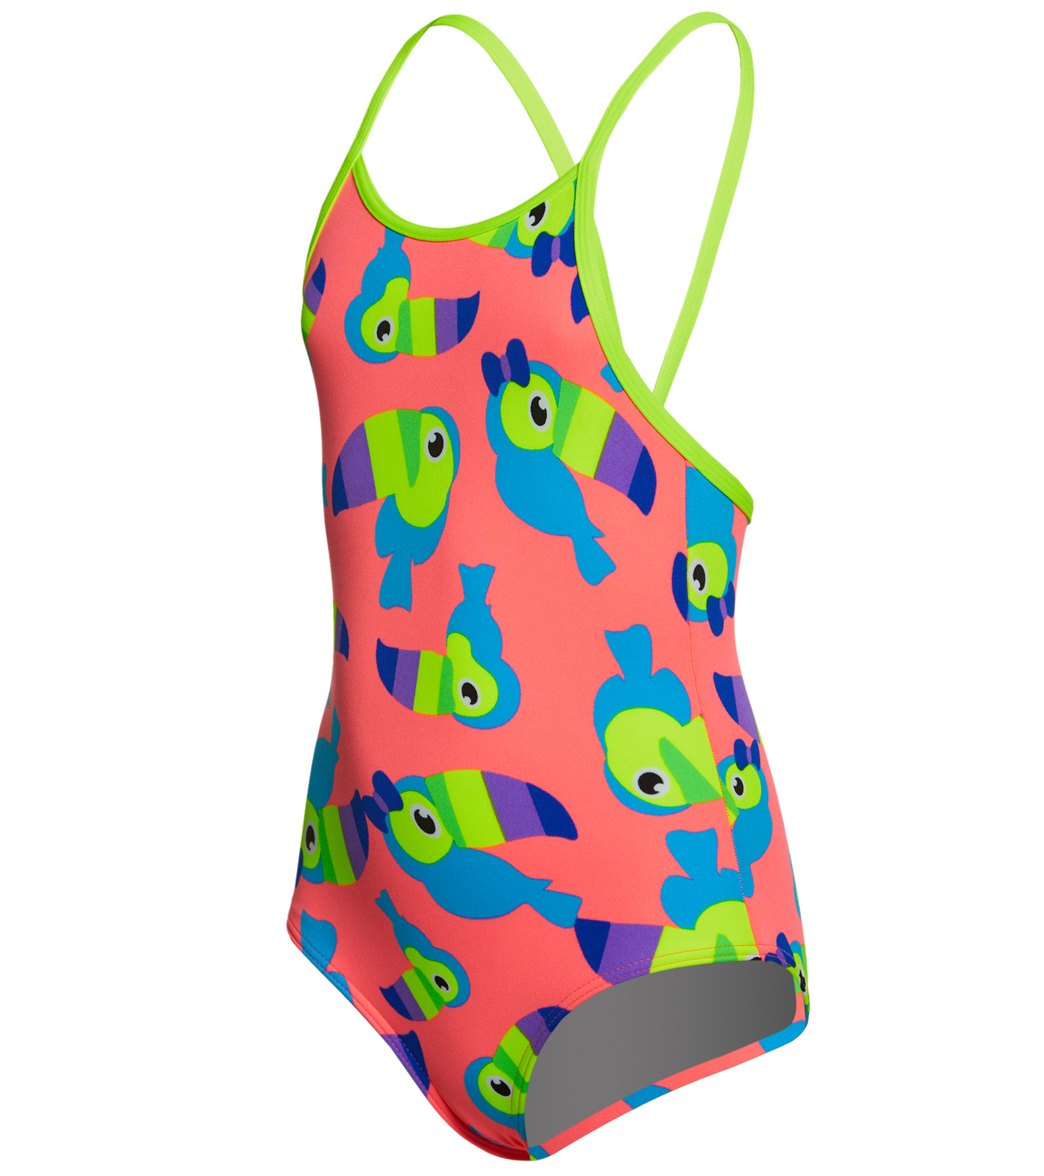 Funkita Toddler Girls' You Can Too One Piece Swimsuit - Multi 1T Polyester - Swimoutlet.com